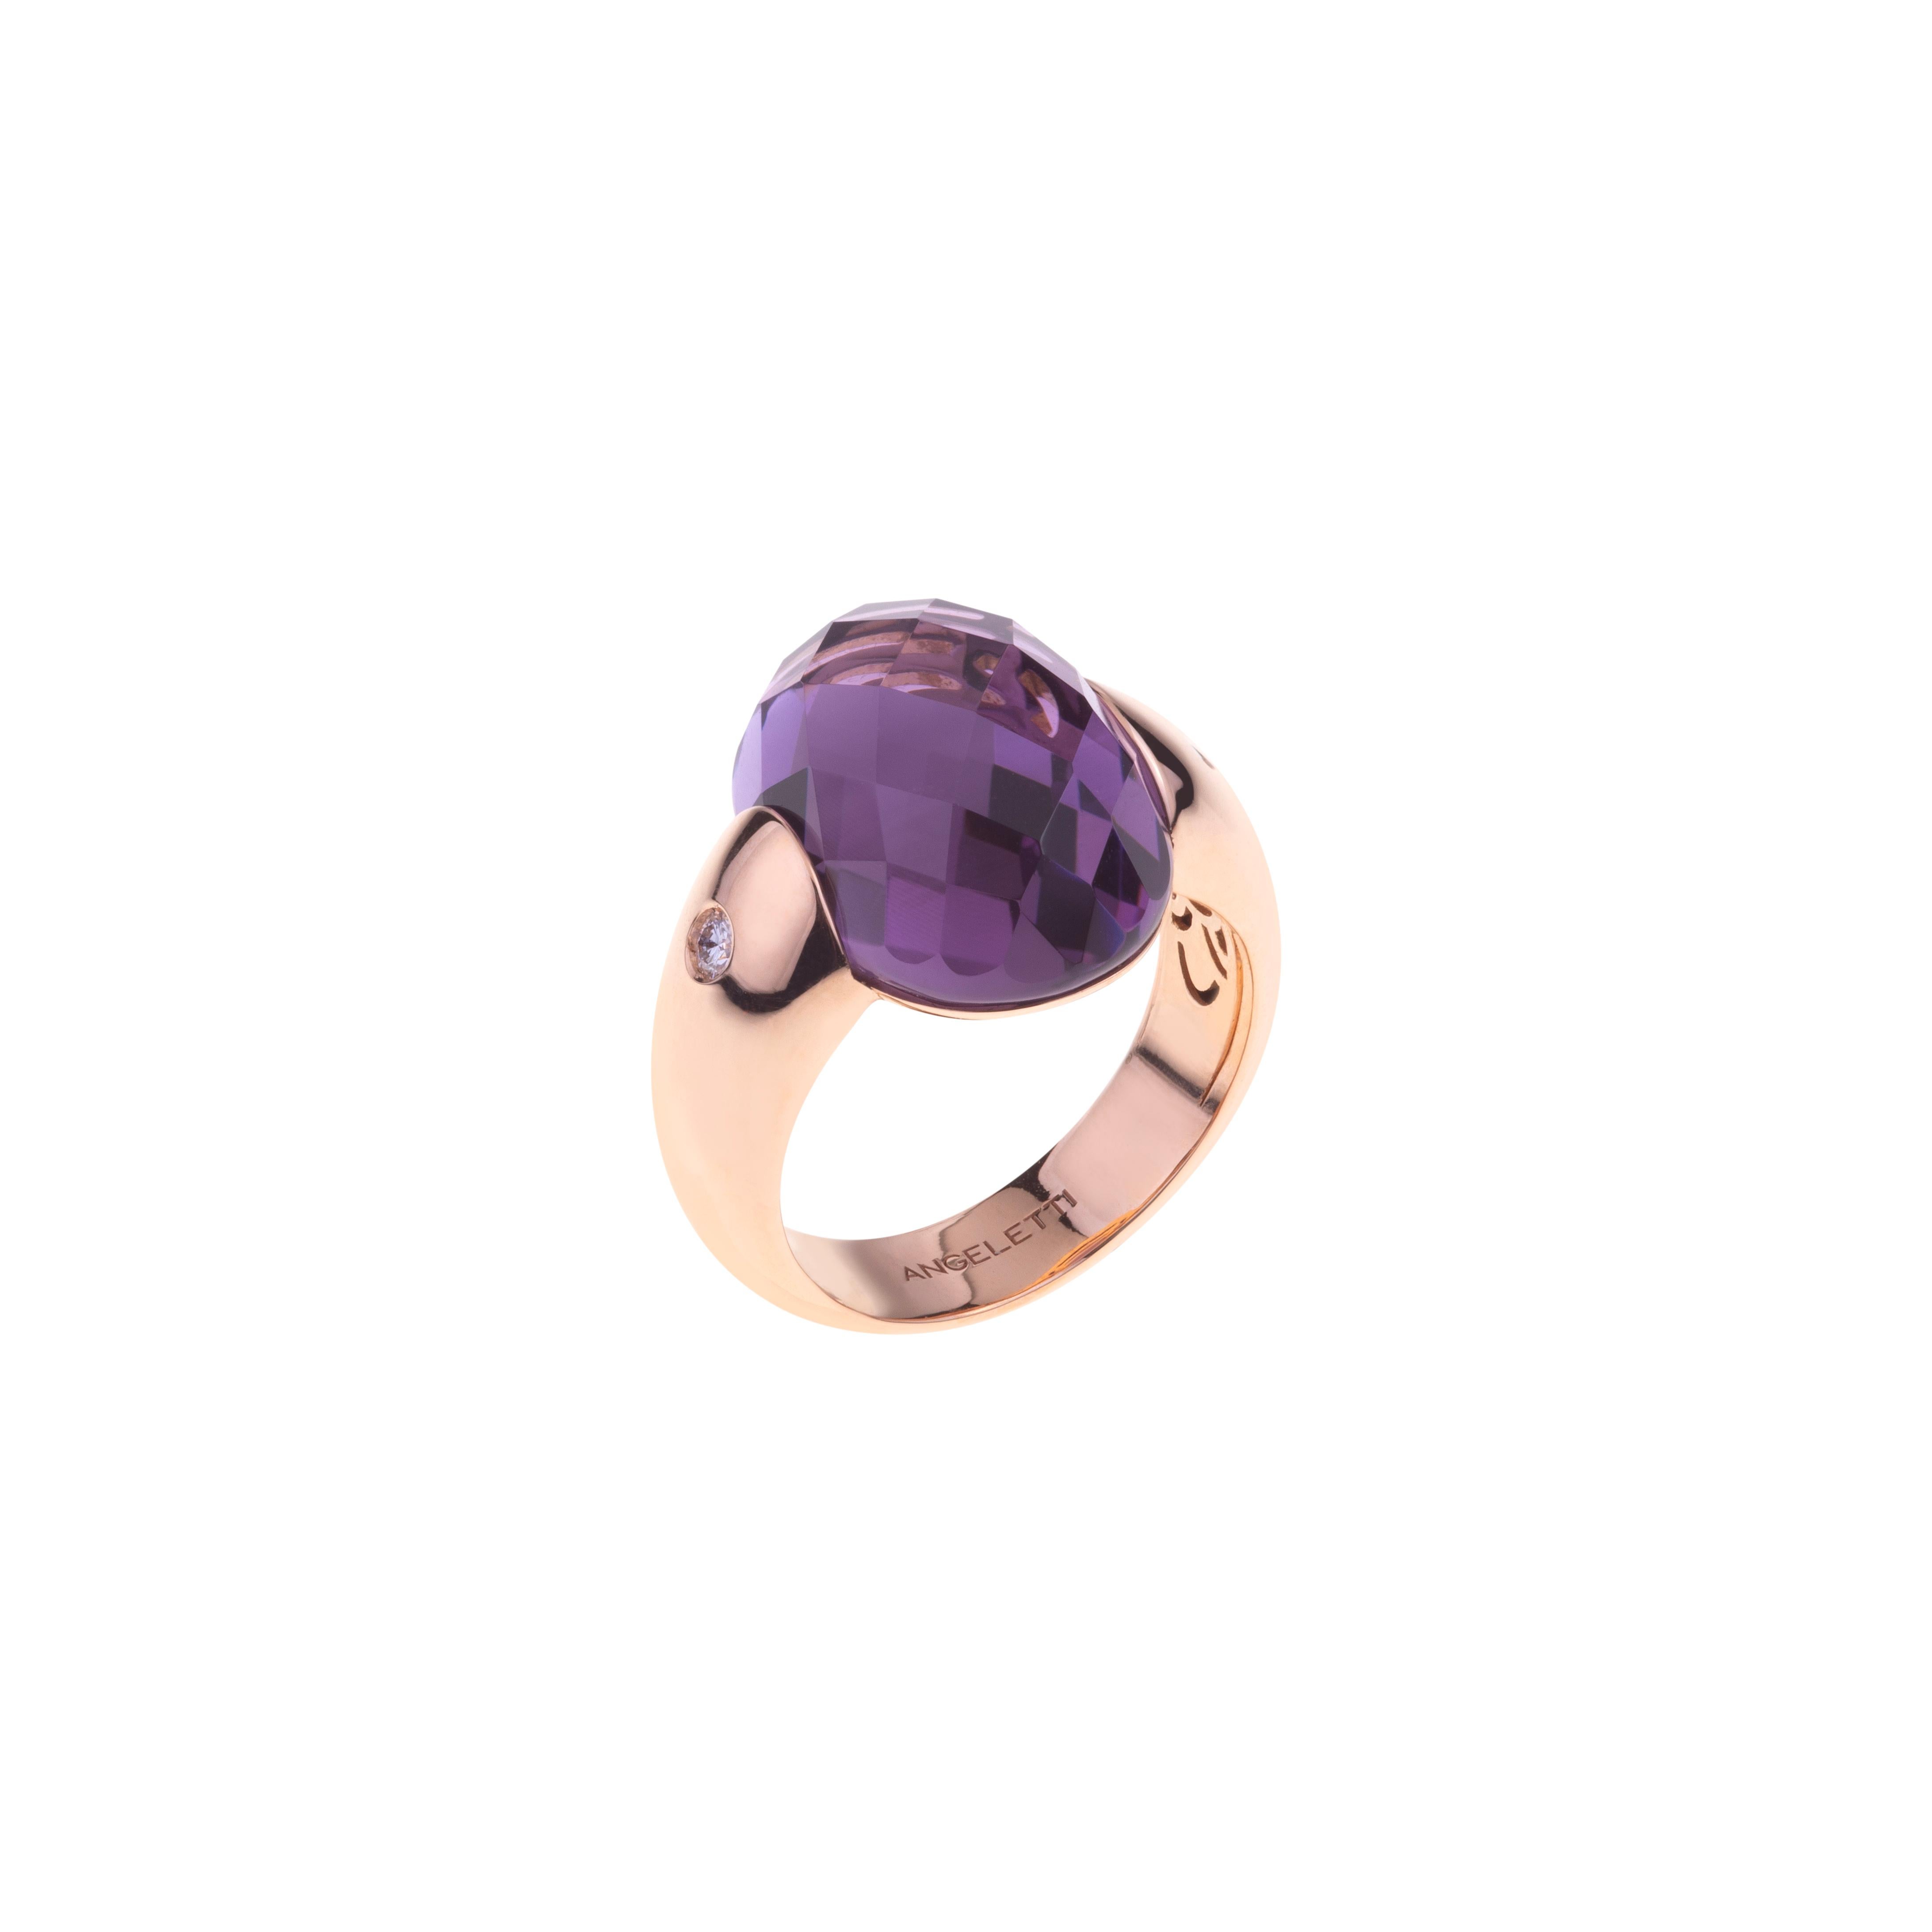 Embrace Collection by Angeletti. Rose Gold Ring With Amethyst and Diamonds.
Iconic Embrace Model, Designed and Manifactured in Rome.
On the side of the Amethyst (ct. 14.51), two diamonds  ct. 0.16. Gold Weight is from 8 to 11 gr. depending on the